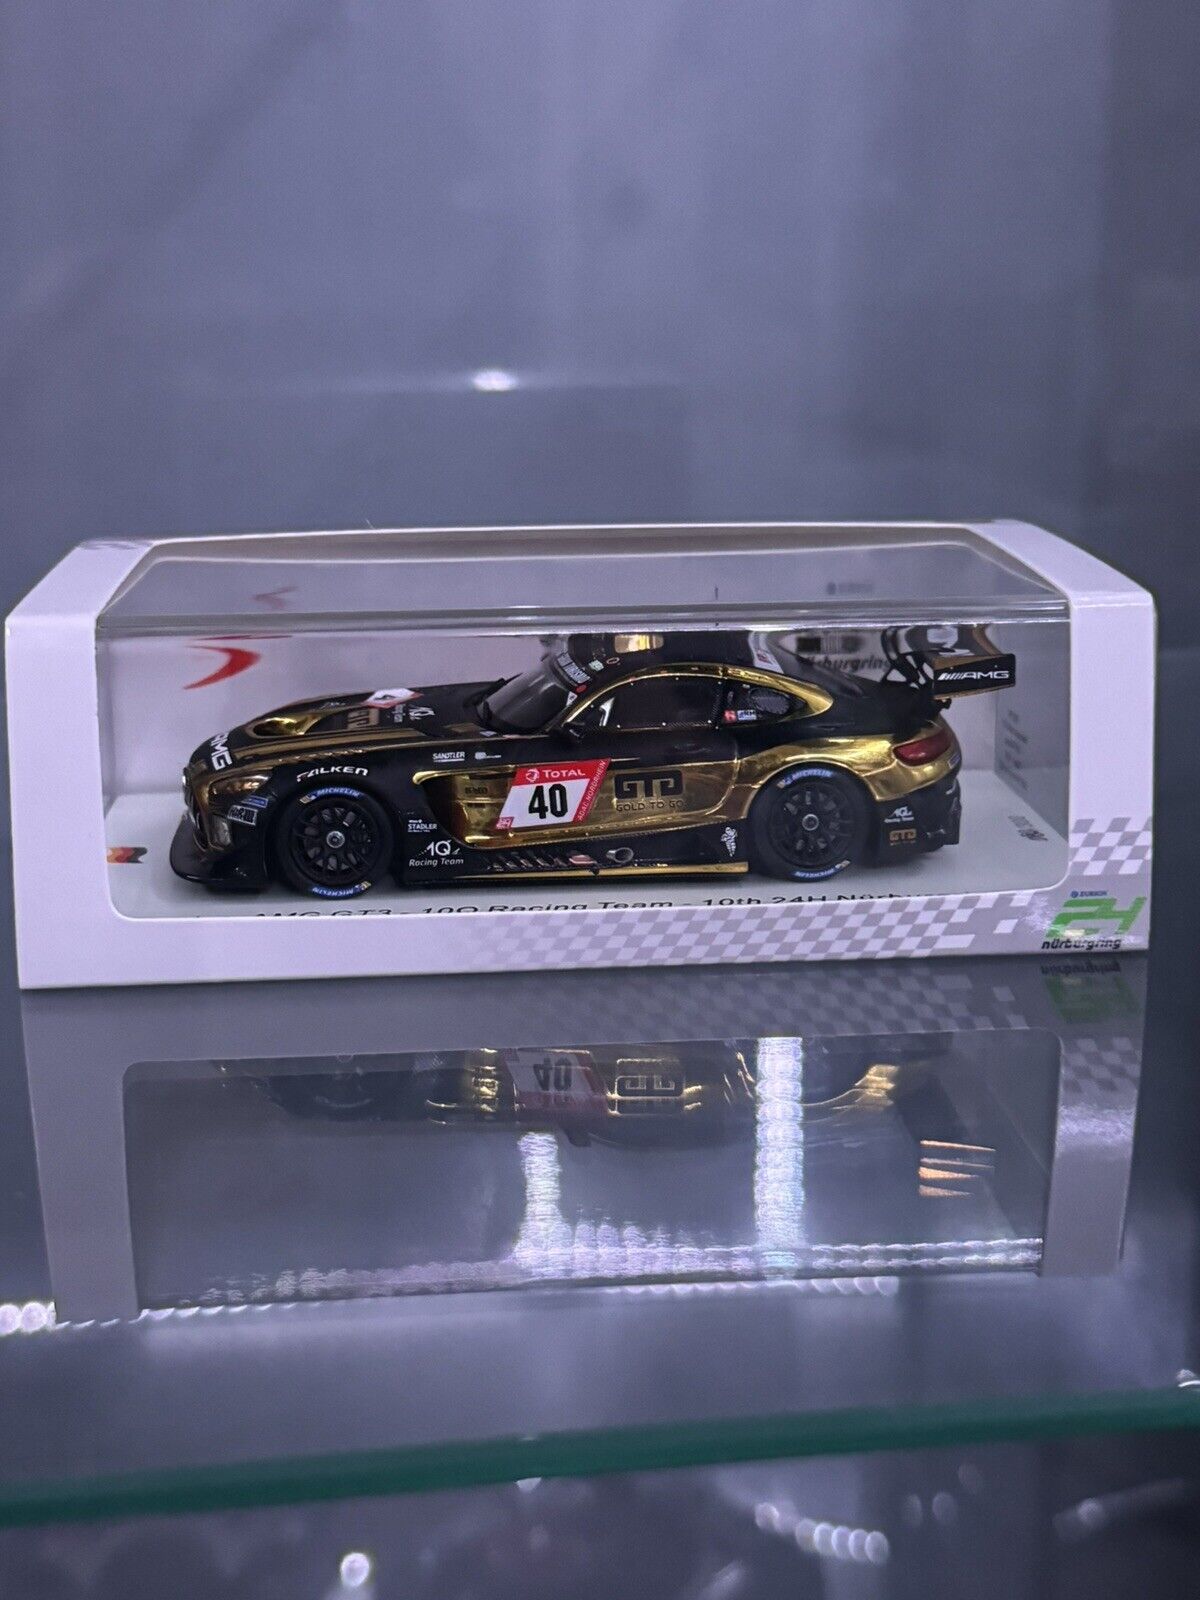 Mercedes-AMG GT3 No.40 10Q Racing Team K. Heyer in 1:43 scale by Spark by Spark